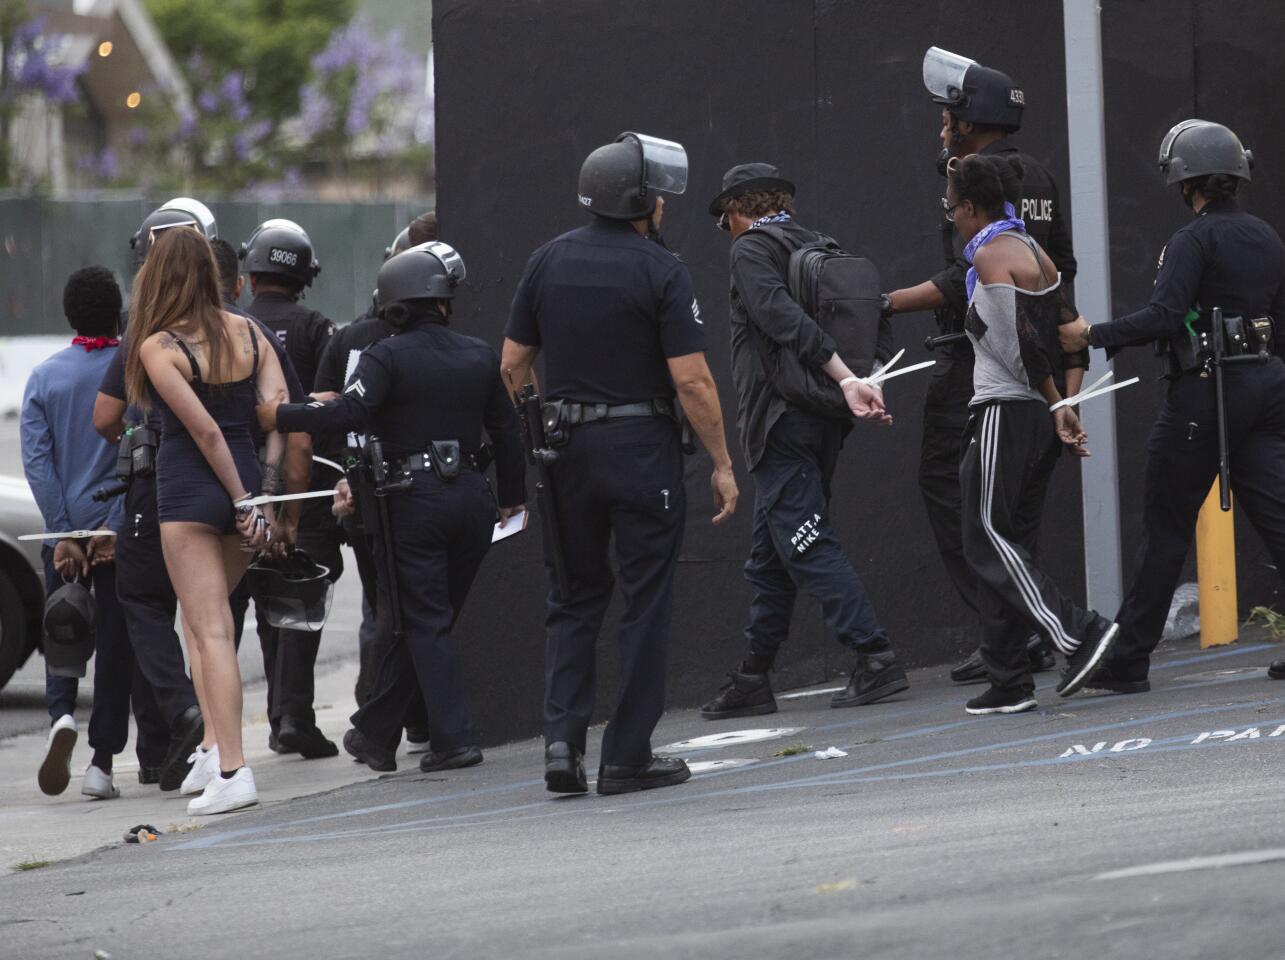 Arrests are made of those out after curfew in Hollywood.